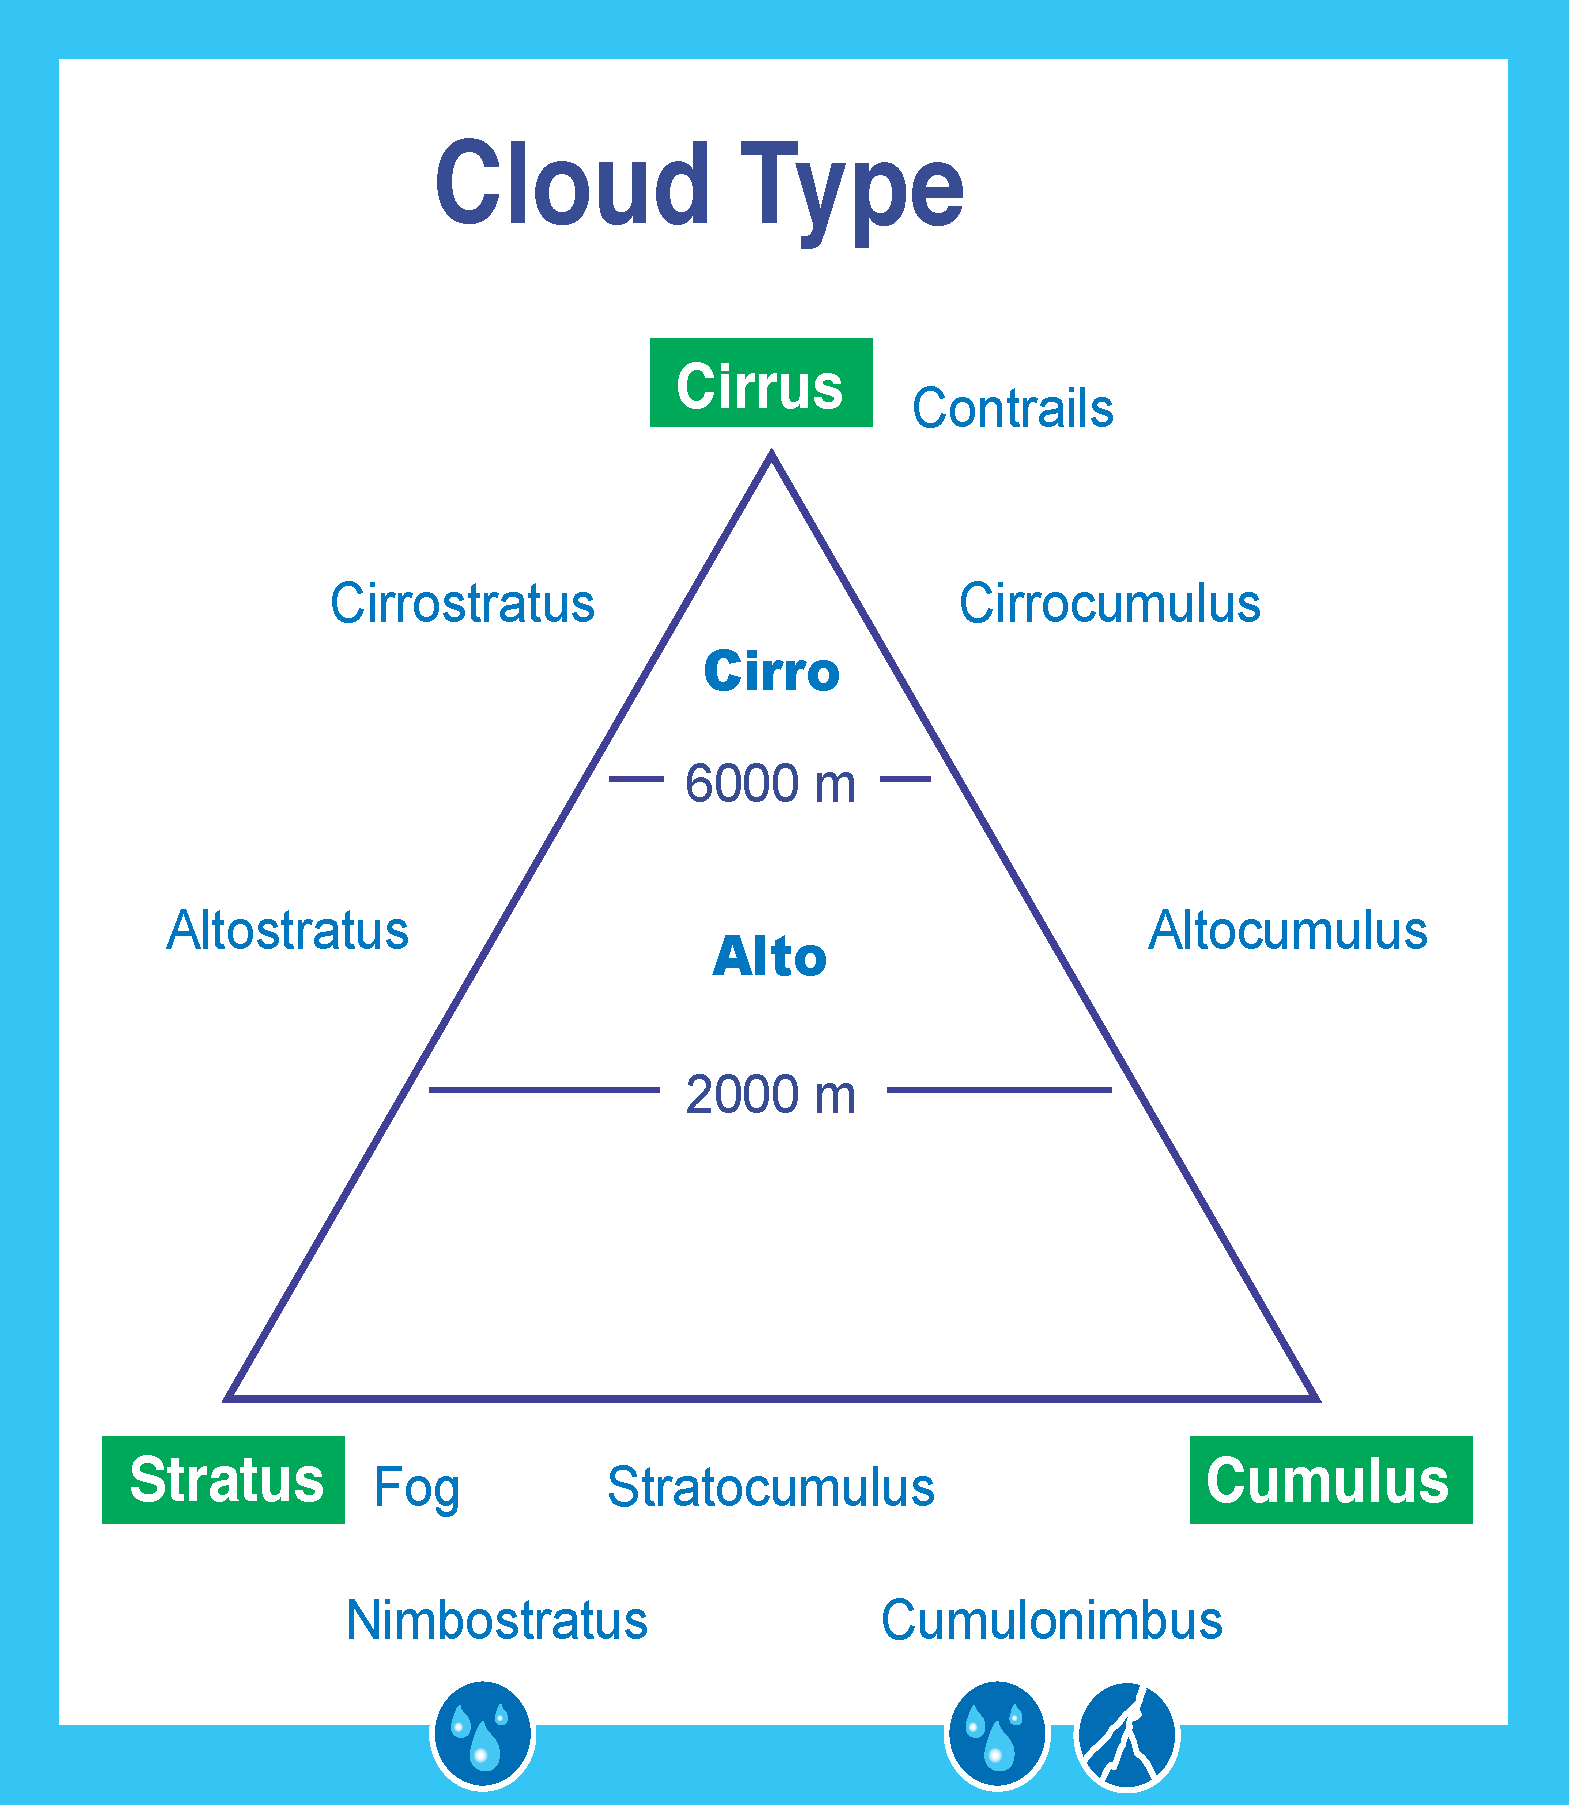 Cloud type diagram. With Cirrus and contrails at the highest altitude, cirrostratus and cirrocumulus below (at 6,000 meters), then altostratus and altocumulus (2,000 meters) and fog, stratocumulus, nimbostratus and cumulonimbus at the bottom.